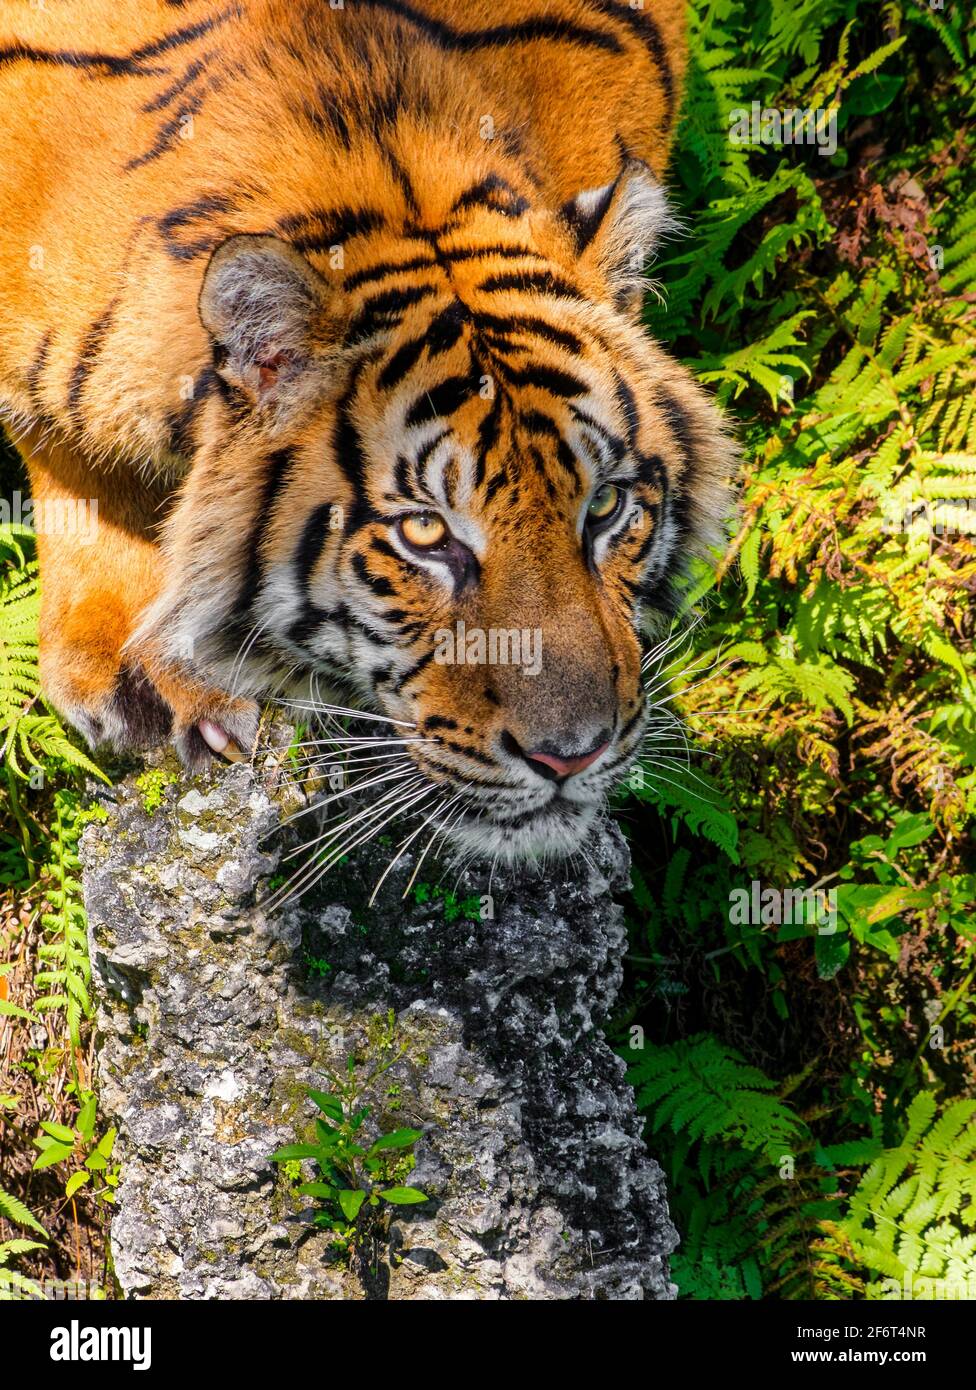 The tiger (Panthera tigris) is the largest cat species, most recognizable for their pattern of dark vertical stripes on reddish-orange fur with a Stock Photo